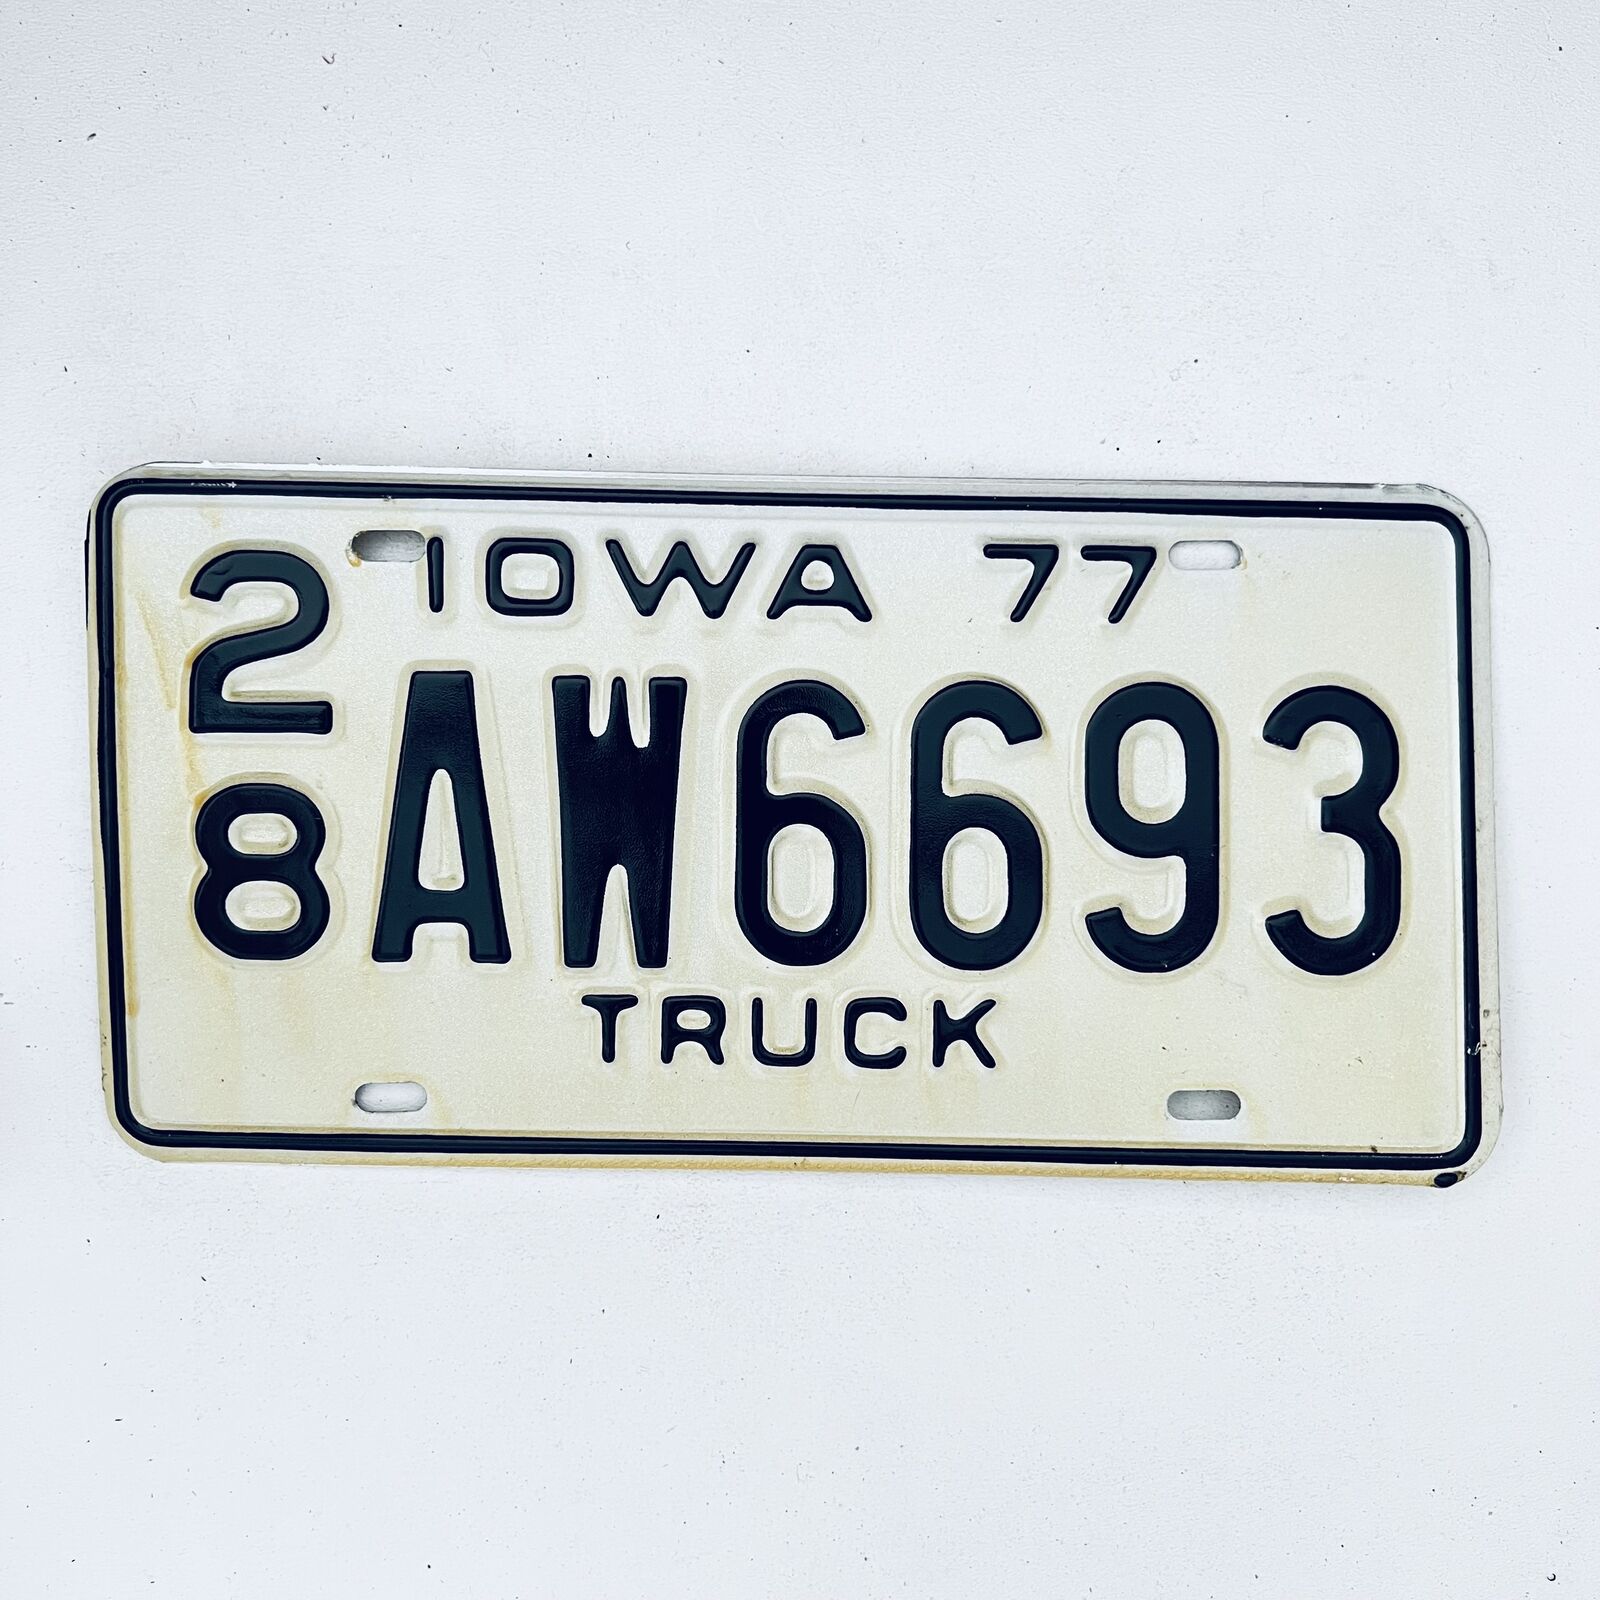 1977 United States Iowa Delaware County Passenger License Plate 28 AW6693